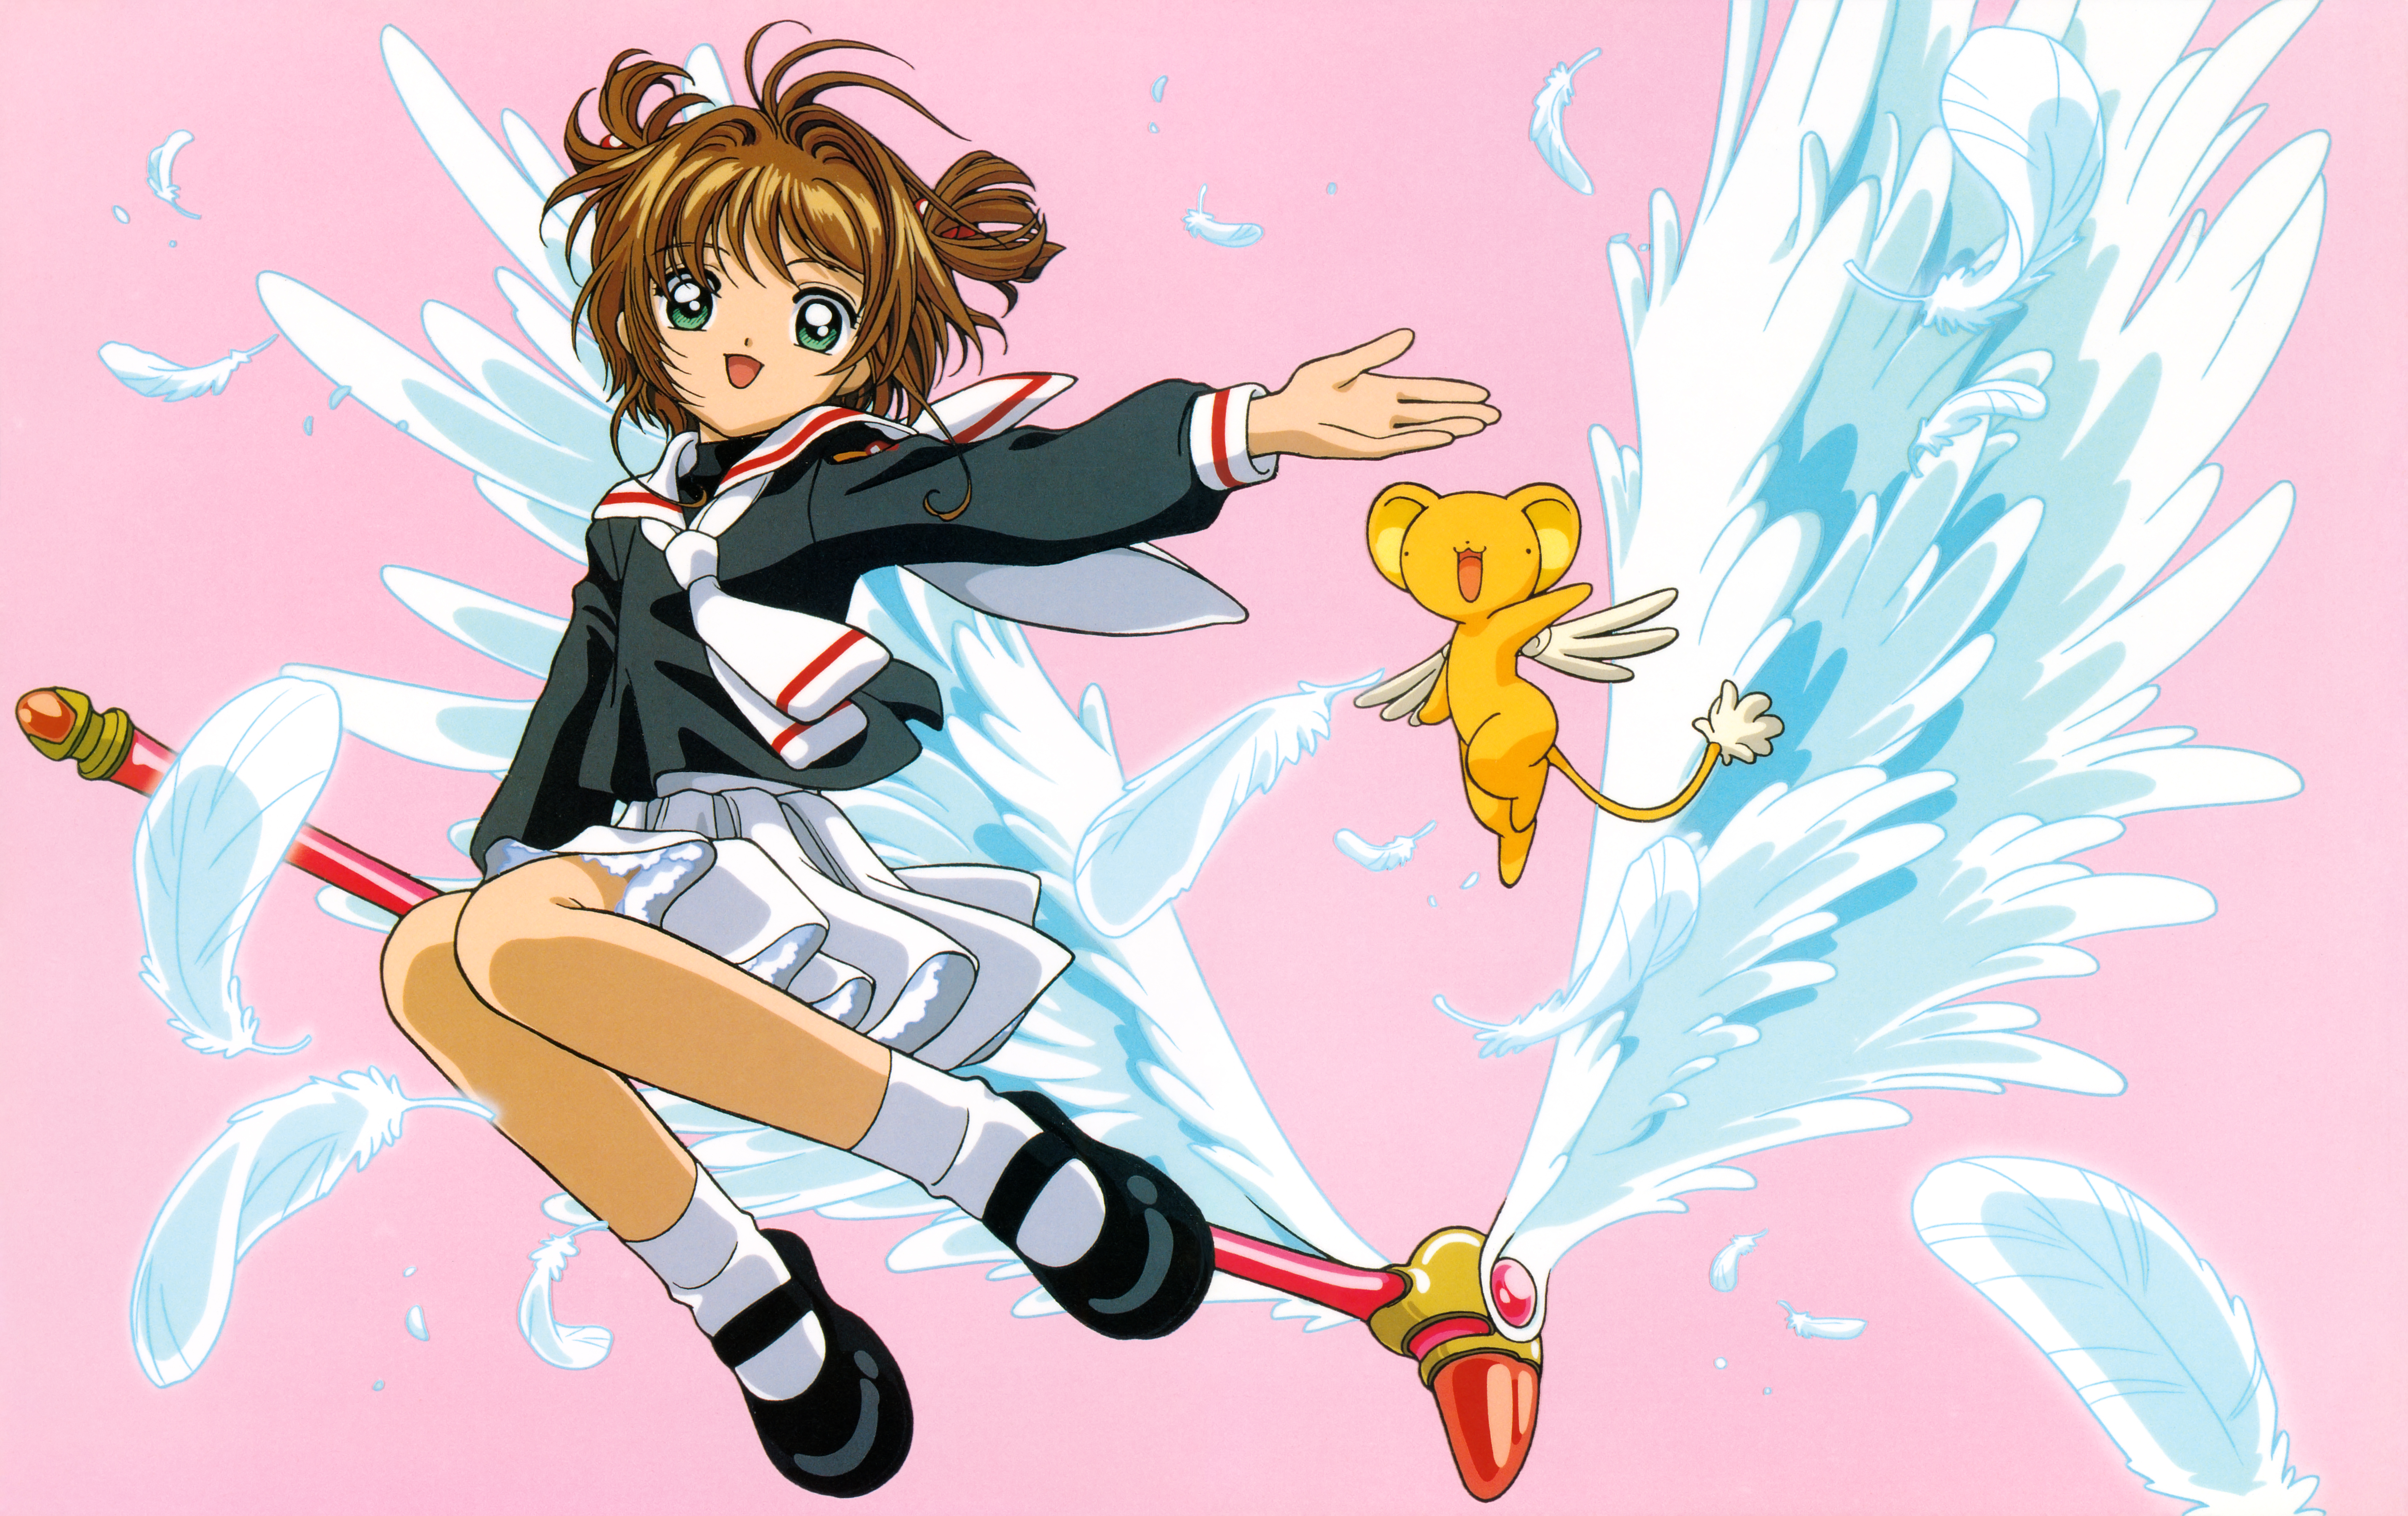 4977x3902 Cardcaptor Sakura Wallpaper Background Image View download  comment and rate  Wallpaper Abyss  Cardcaptor sakura Cardcaptor Sakura  card